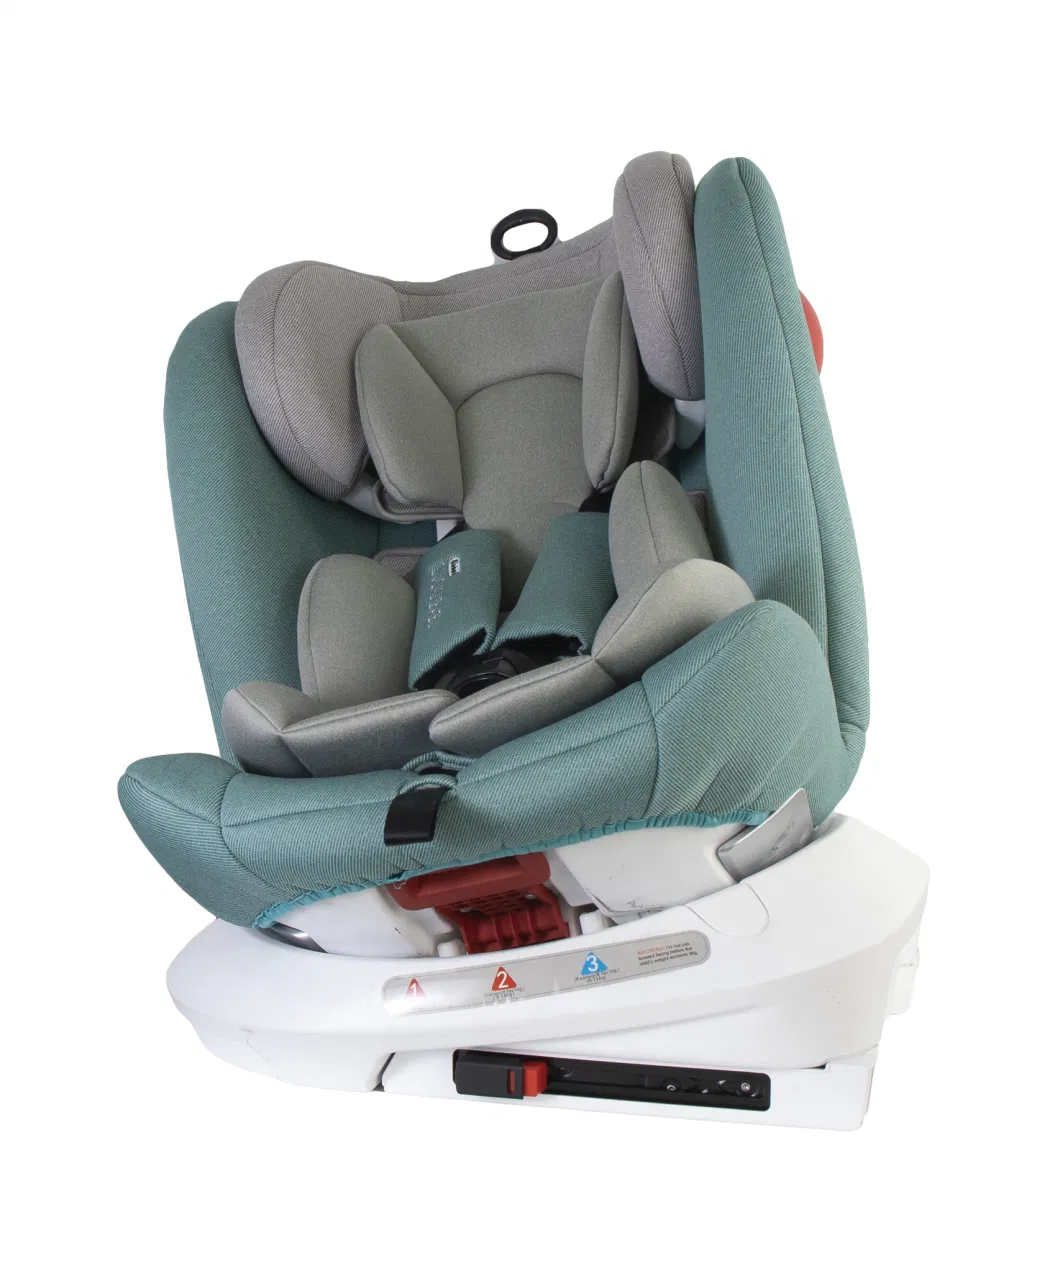 Lb619 Kids Car Seat Rotating Group 0+ 1/2/3 with Certificate ECE R44/04